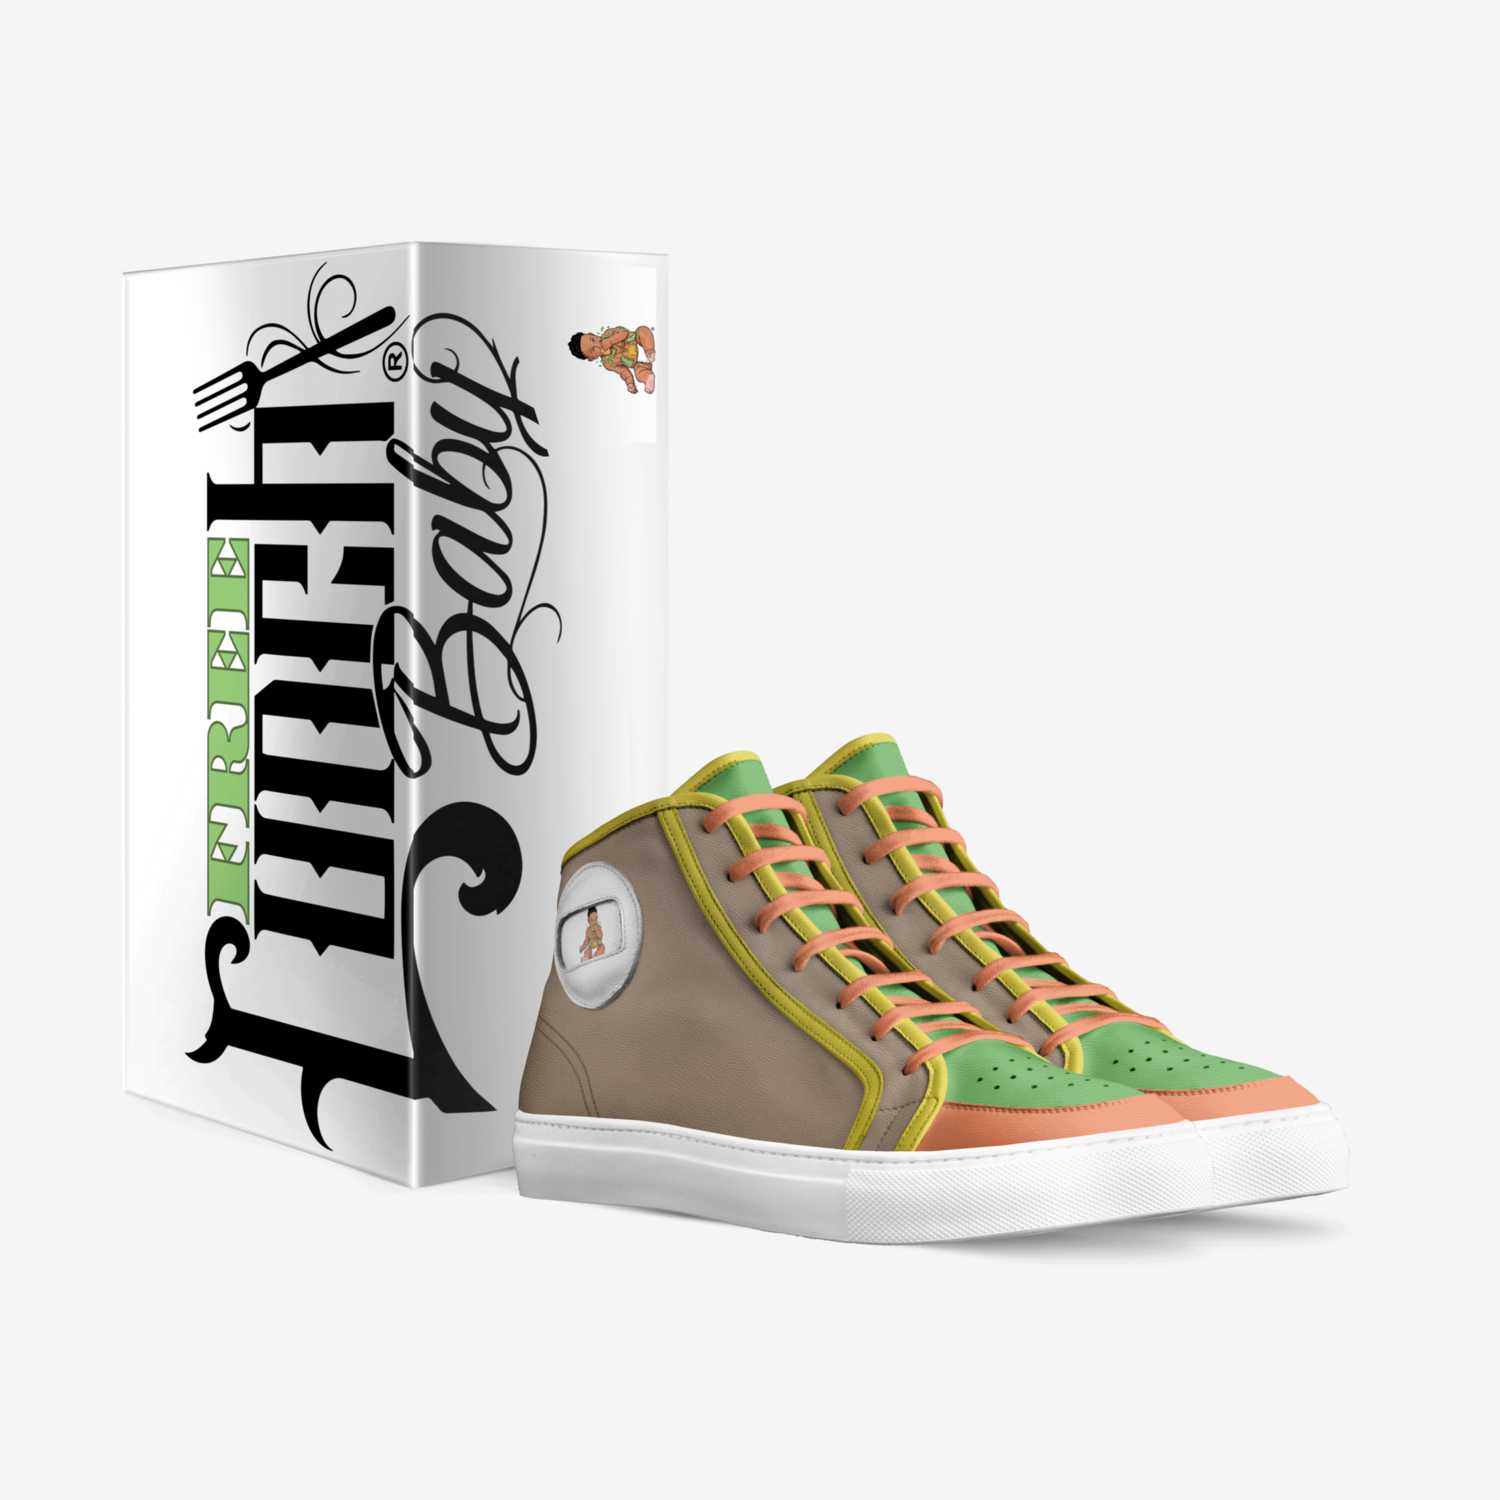 Free Lunch Baby OG custom made in Italy shoes by Free Lunch Baby Llc. | Box view